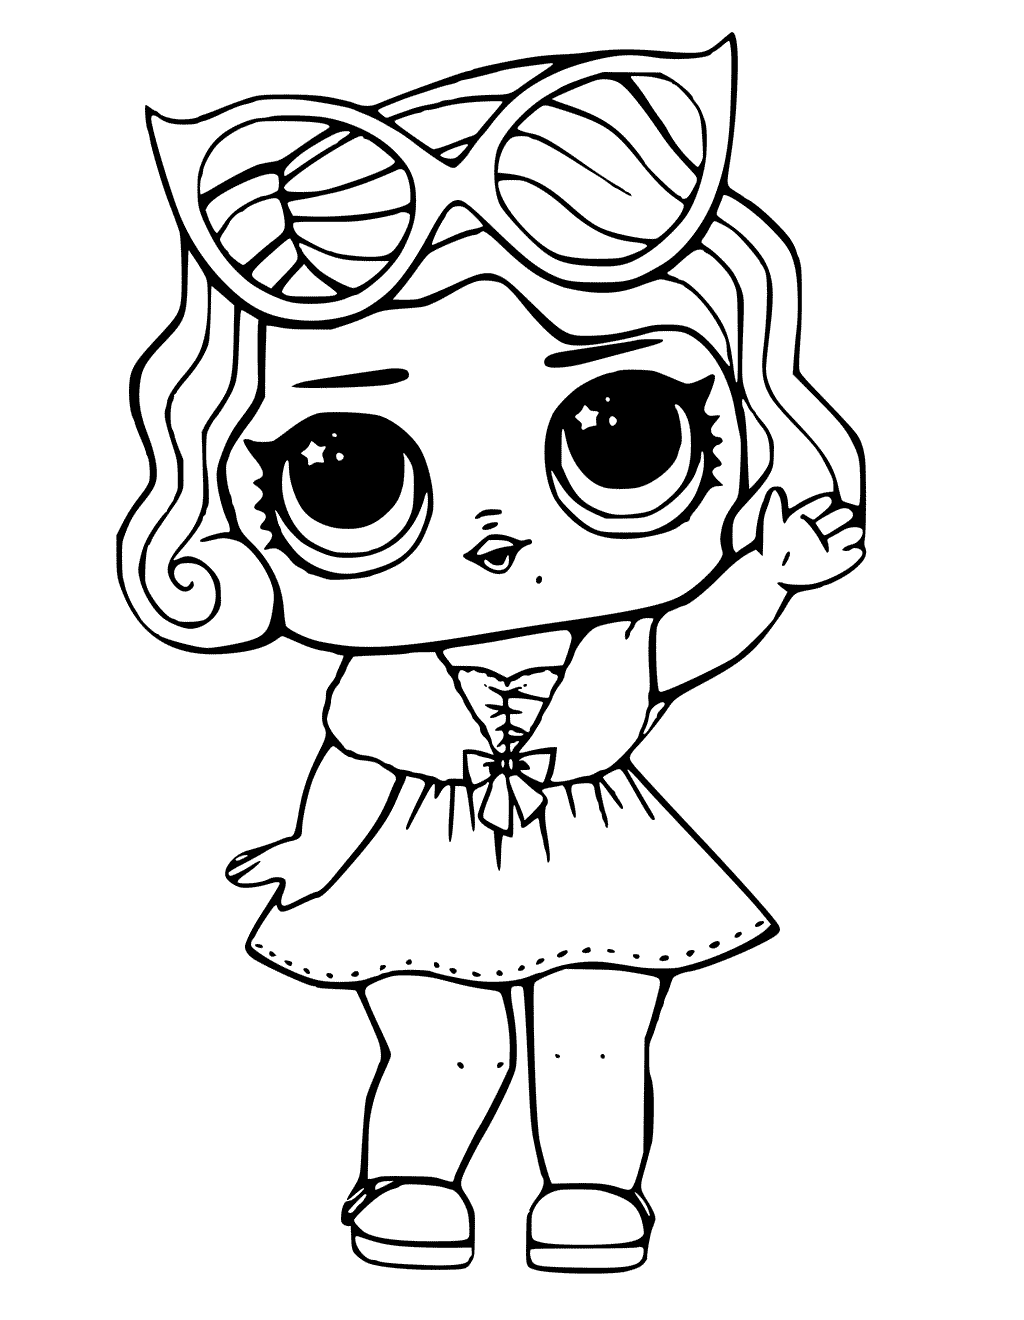 The best free Lol coloring page images. Download from 475 free coloring